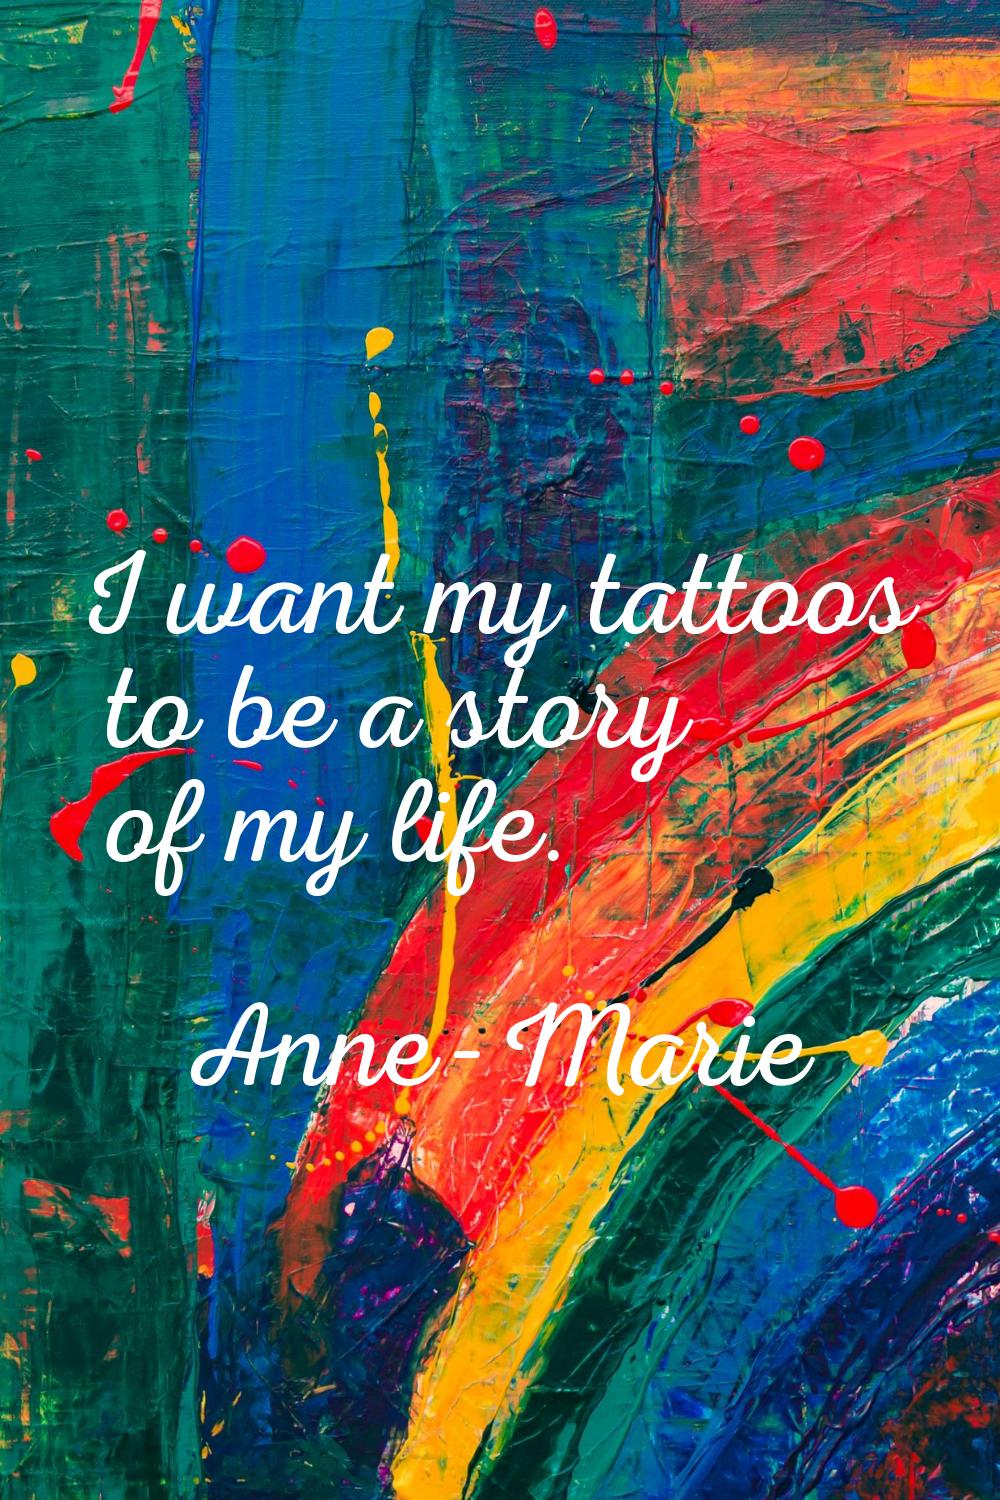 I want my tattoos to be a story of my life.